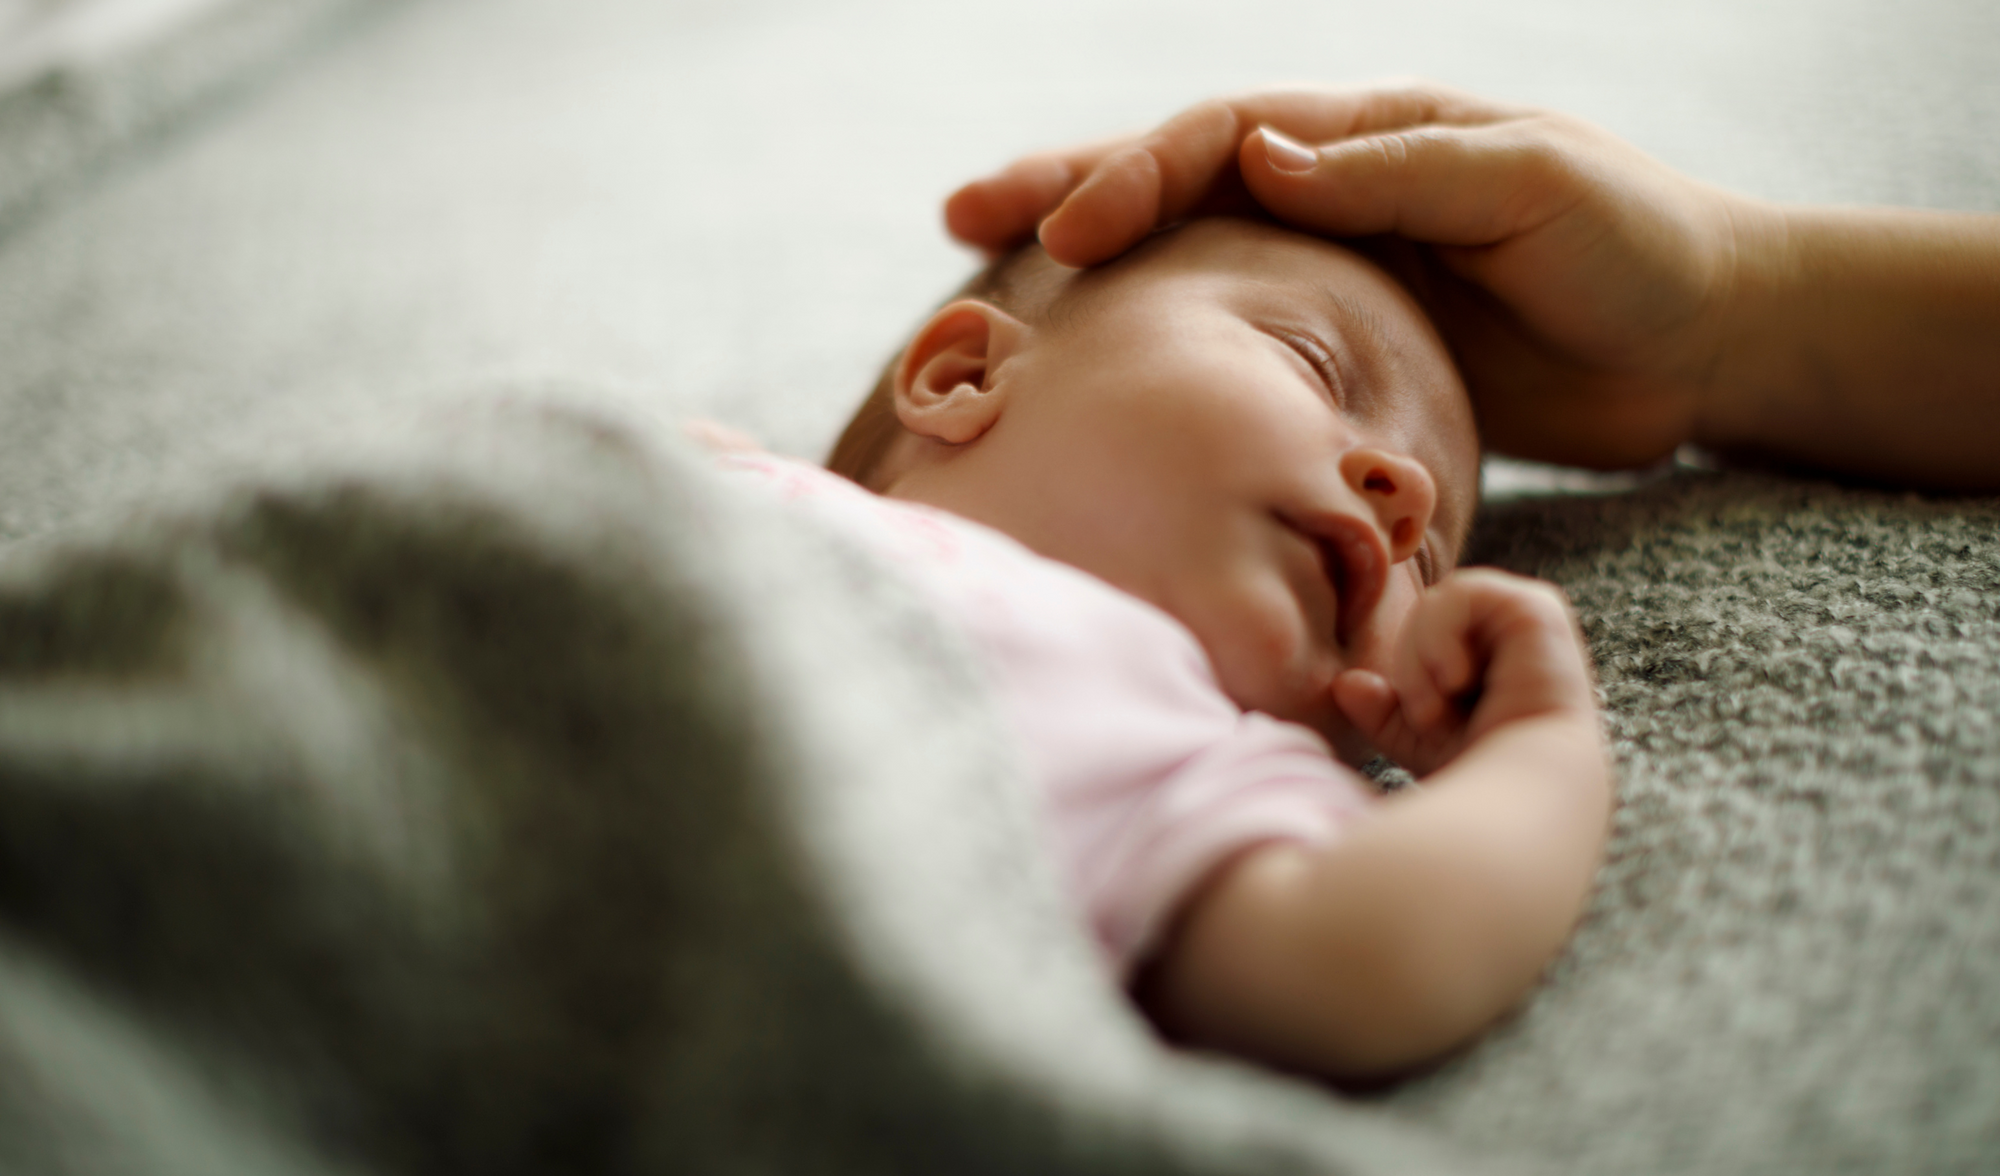 Moro Reflex: Why It Happens and How to Calm Your Startled Baby